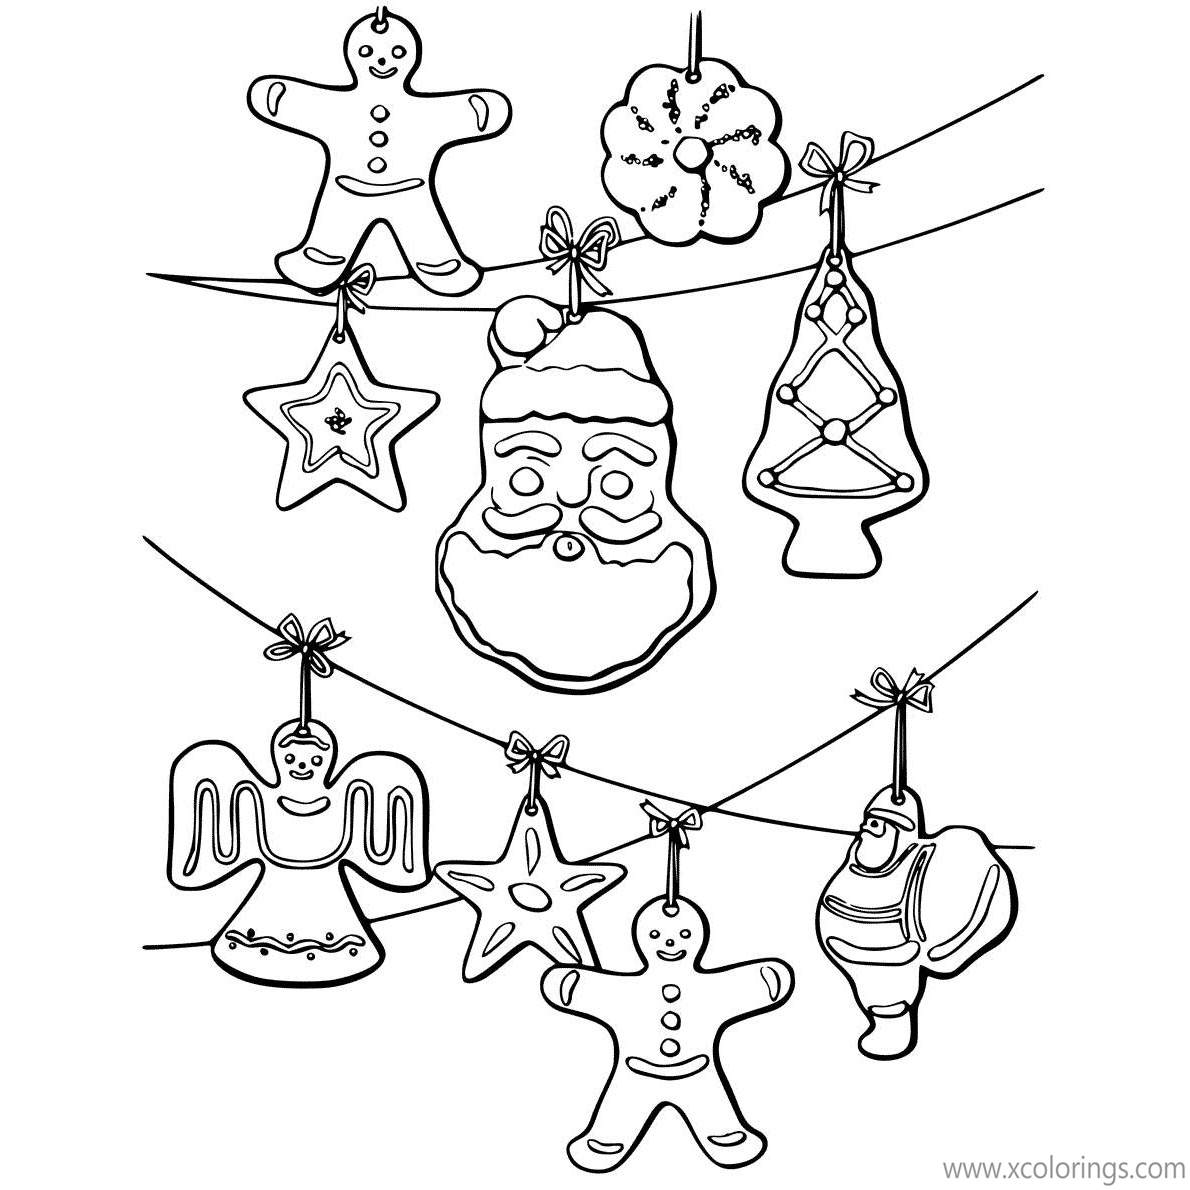 Free Christmas Ornament Coloring Pages with Gingerbread Man Christmas Tree Santa Claus printable